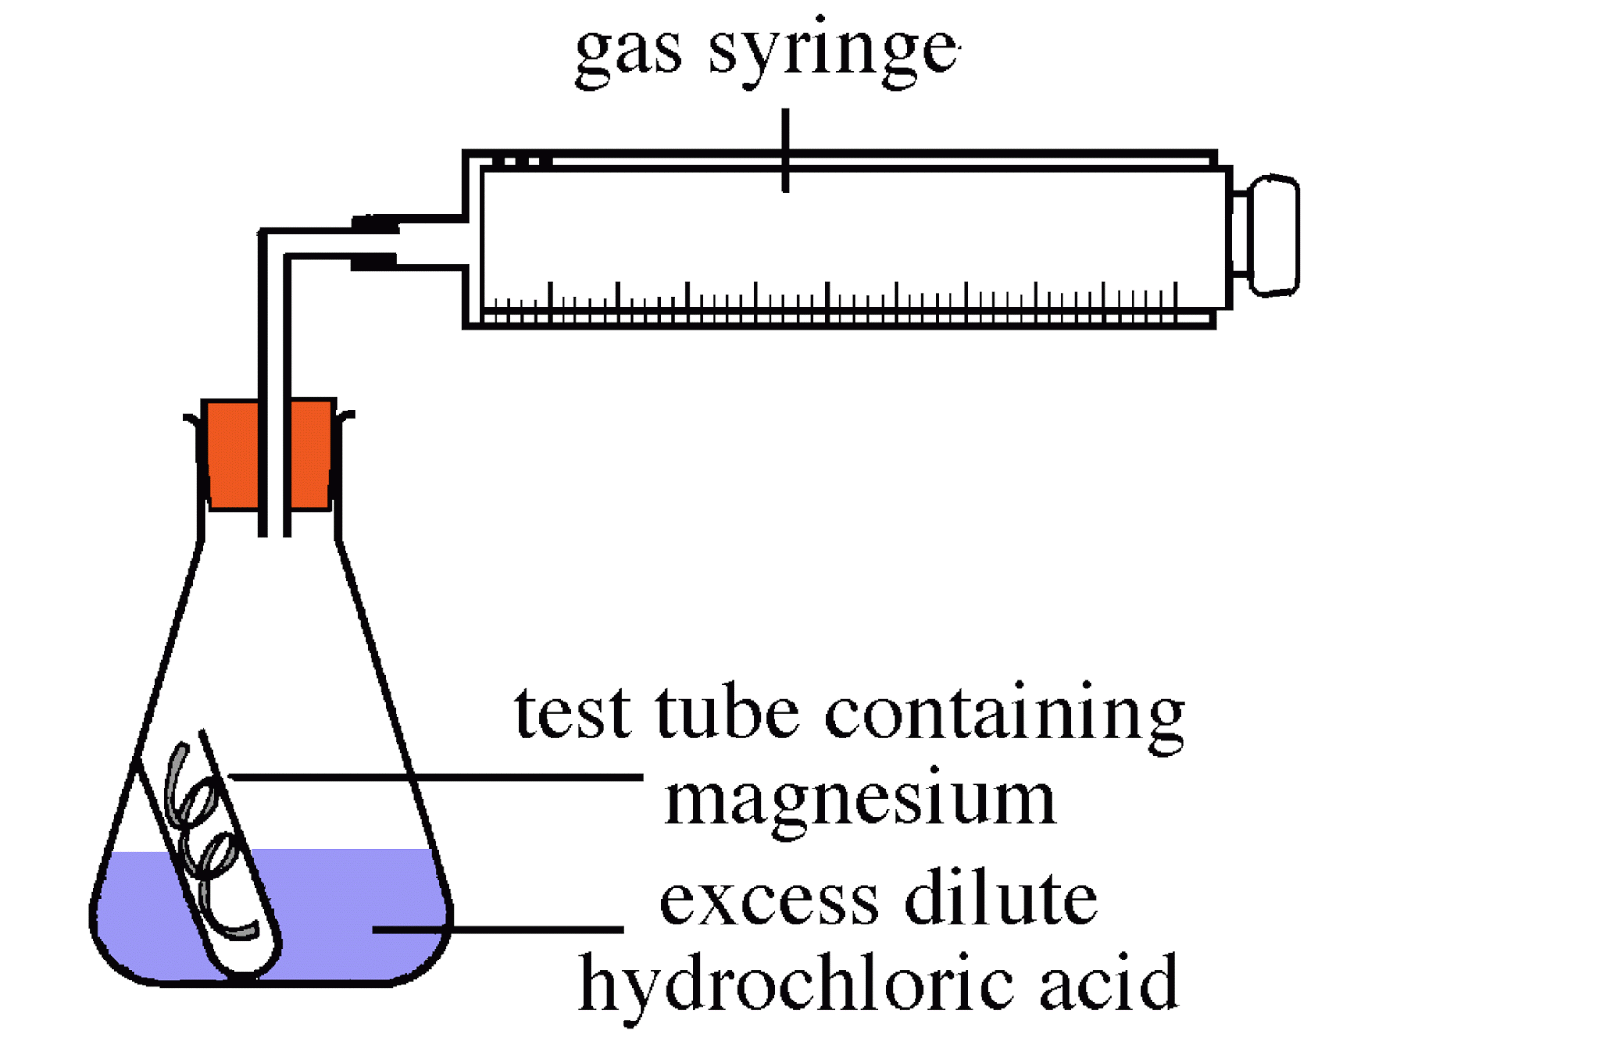 reacting magnesium with hydrochloric acid